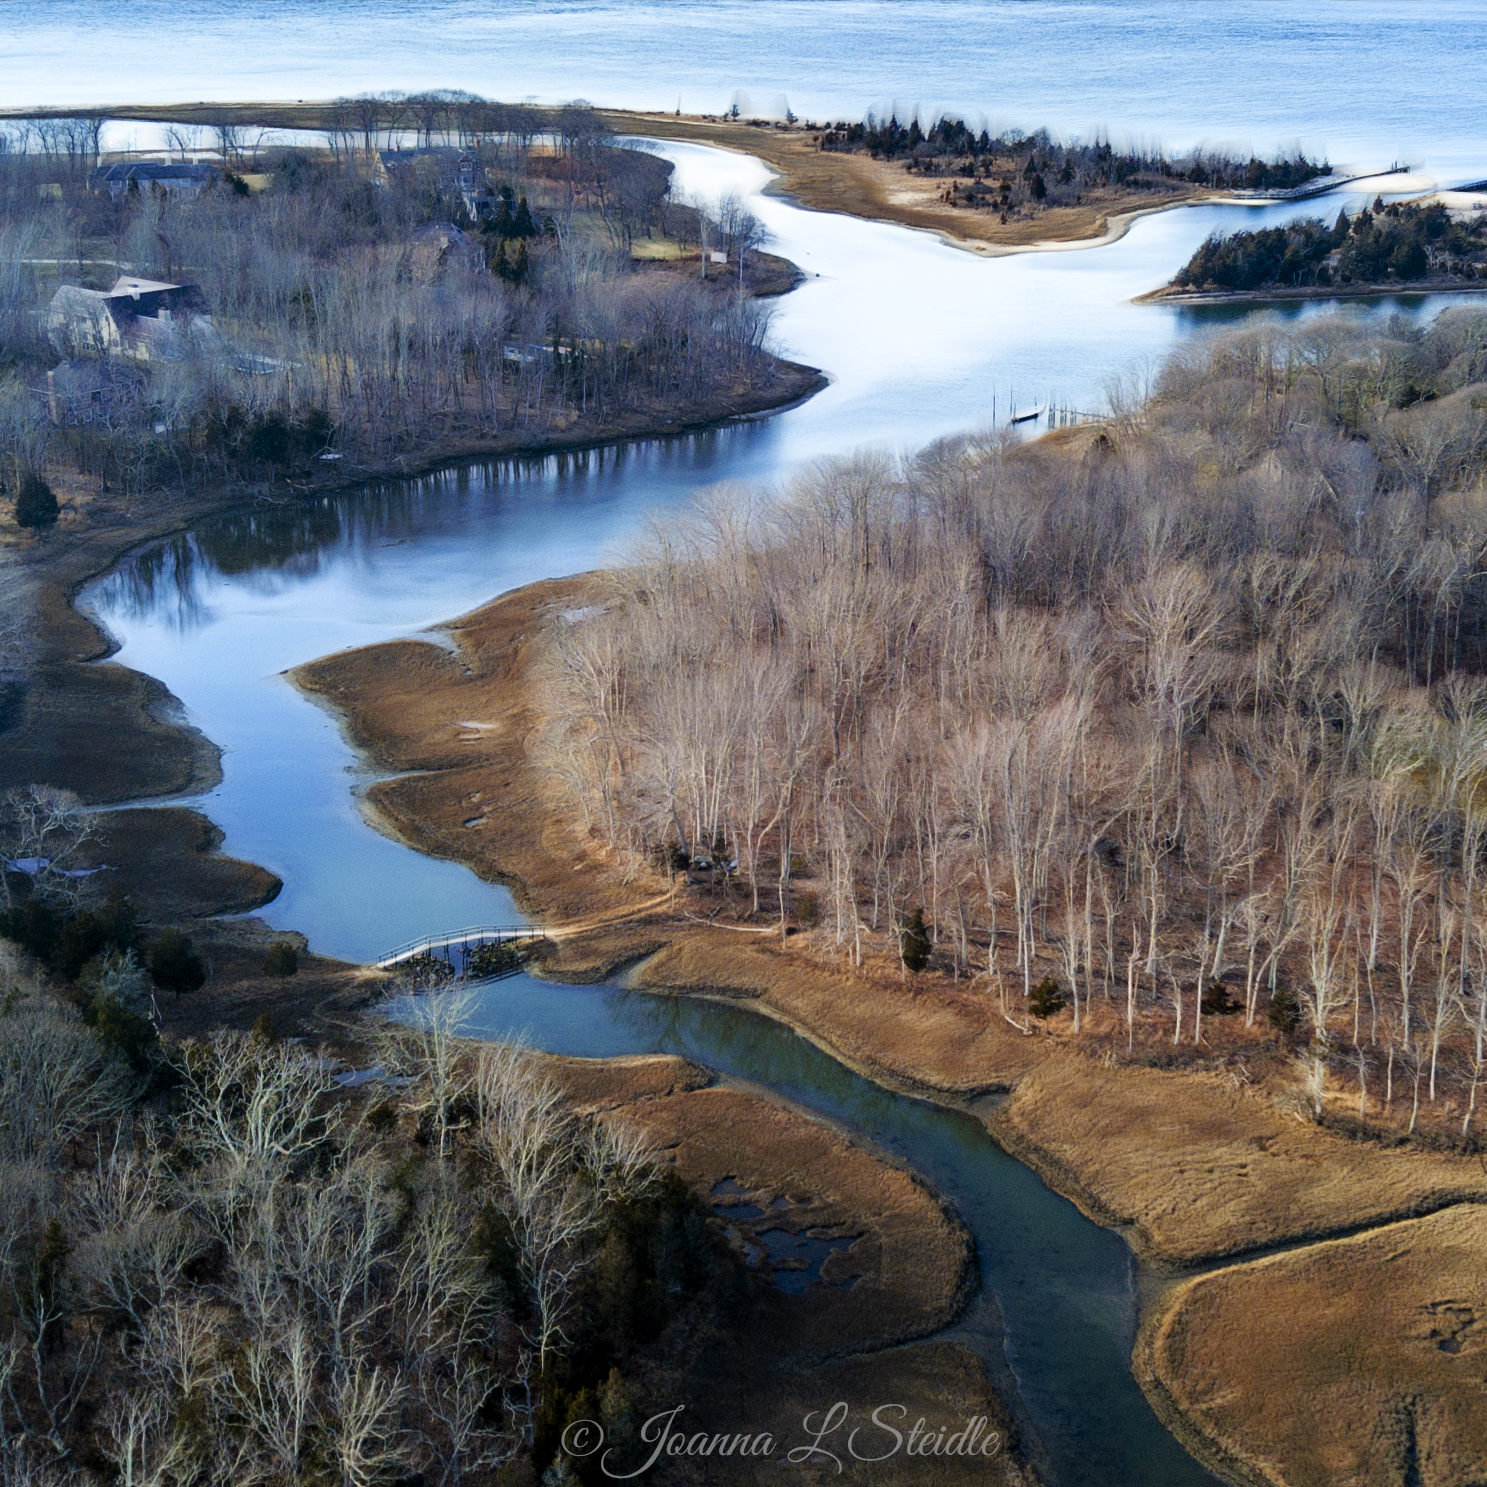 1st Place Waiting for Summer -North Haven, NY by Joanna L Steidle @HamptonsDrone